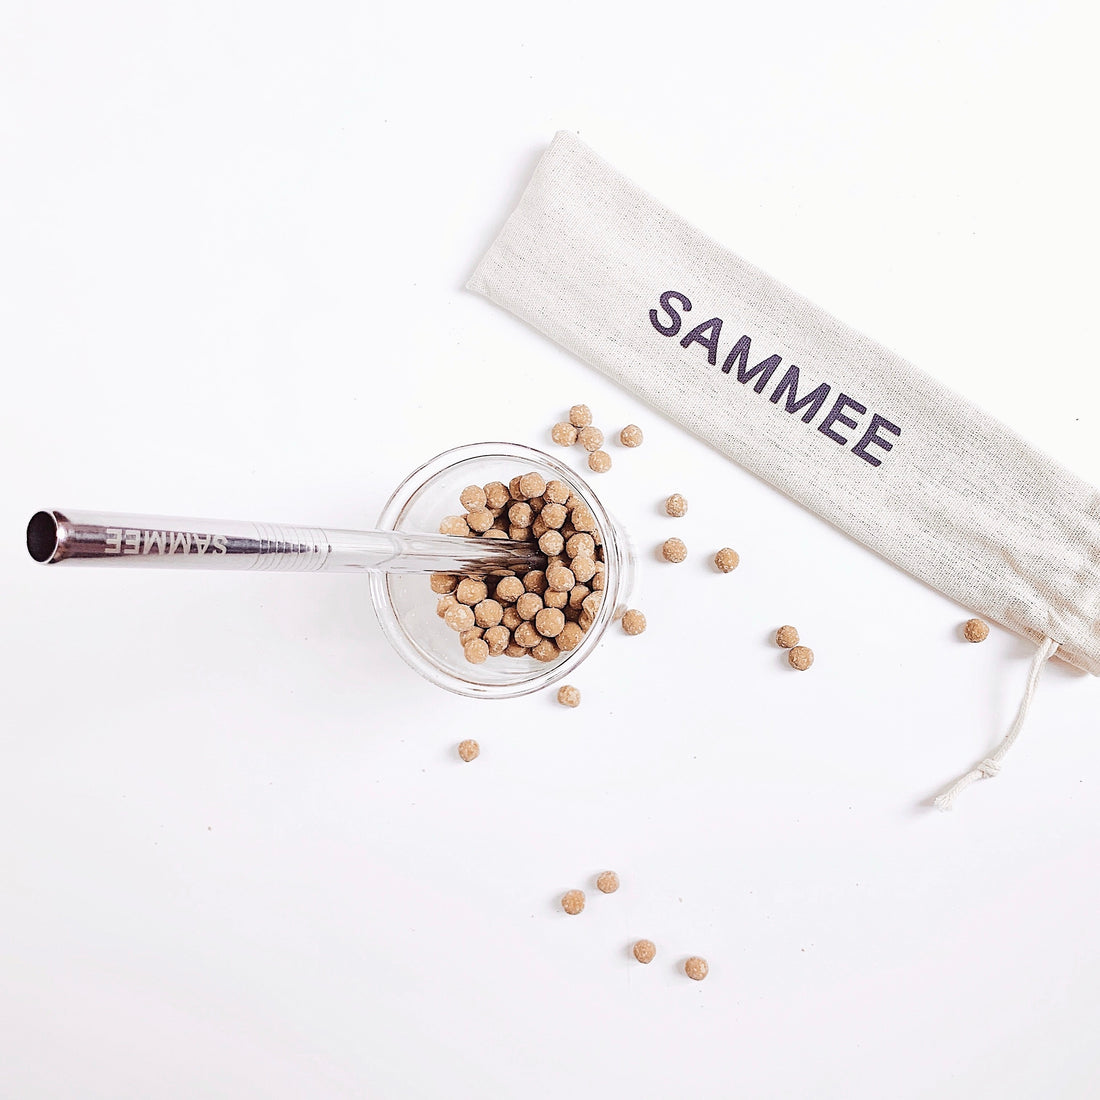 Reusable Stainless Steel Boba Straw with Cleaning Brush for Bubble Tea by SAMMEE